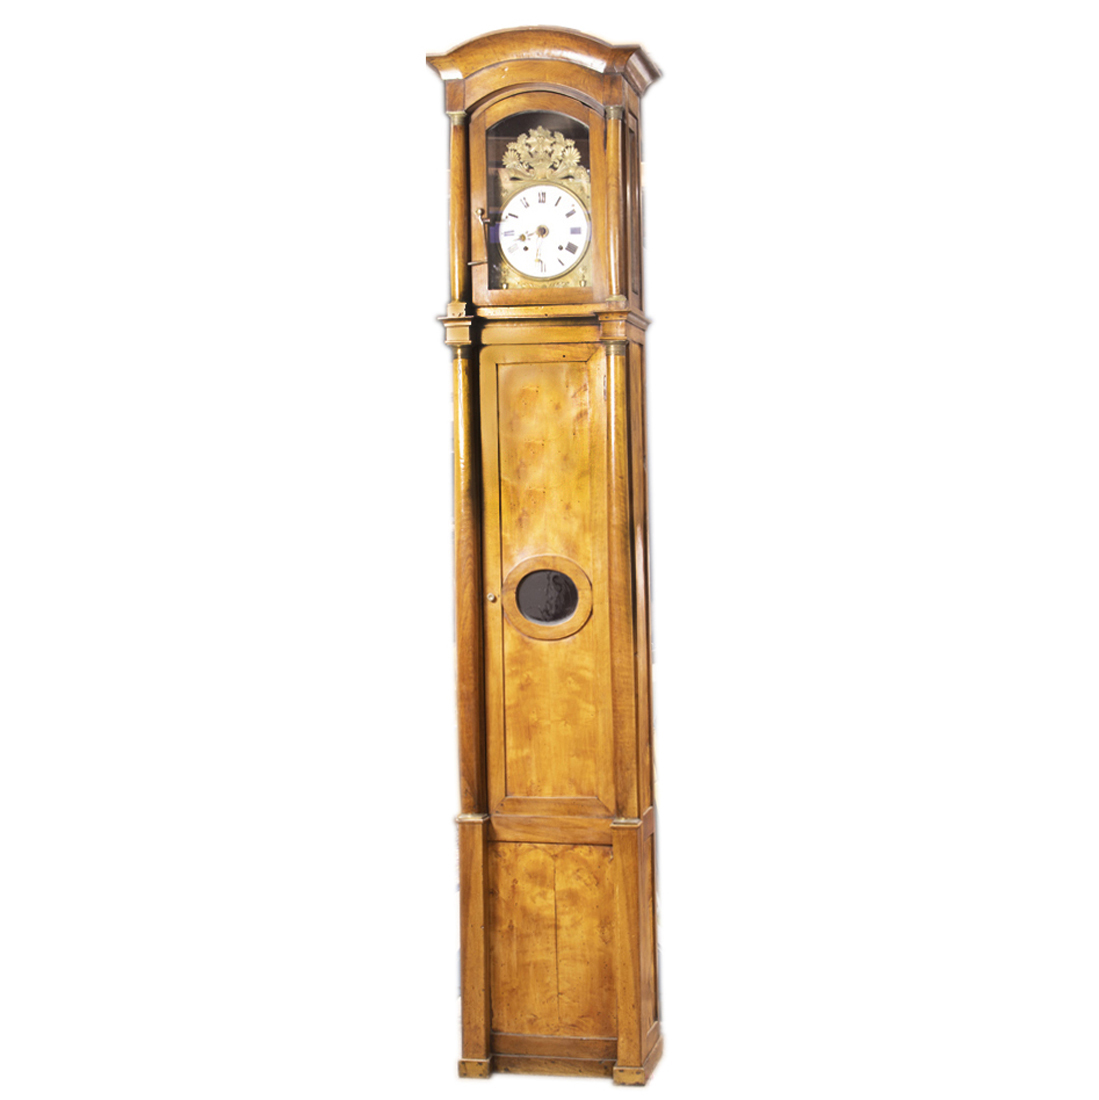 A FRENCH TALL CASE CLOCK A French